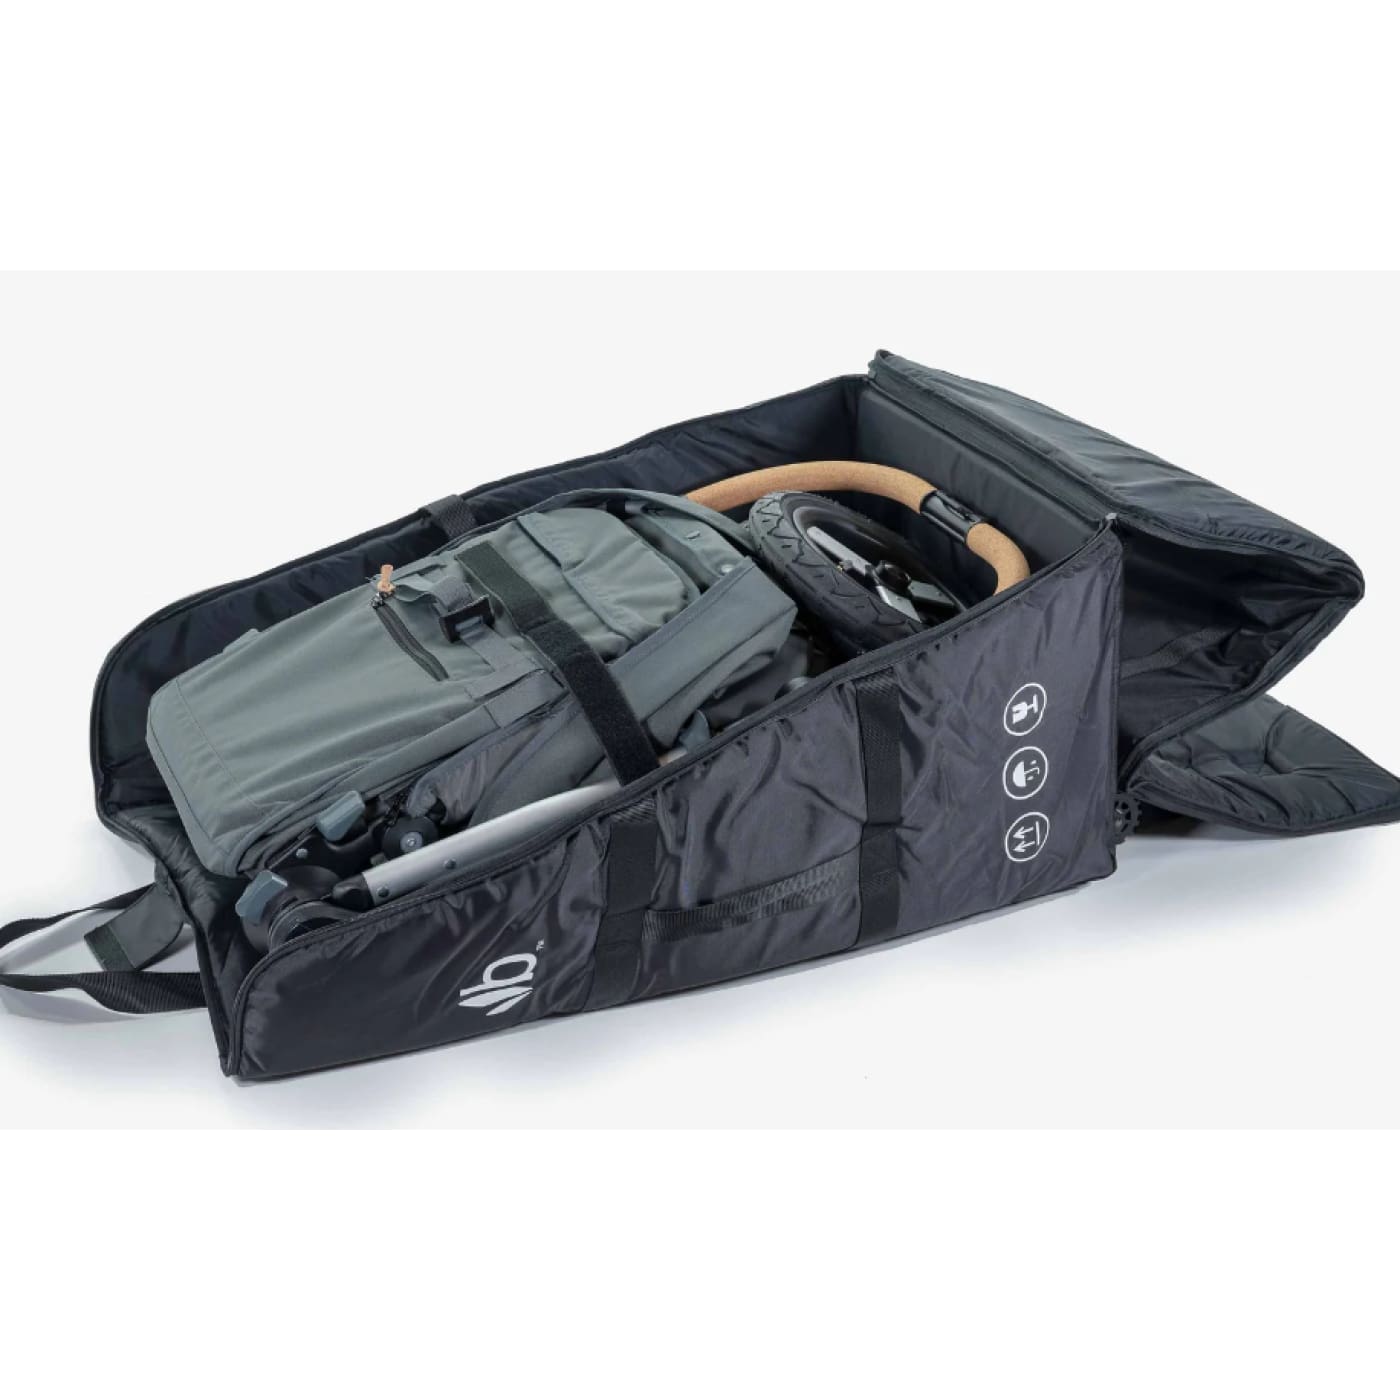 Bumbleride Travel Bag - ON THE GO - TRANSPORT BAGS